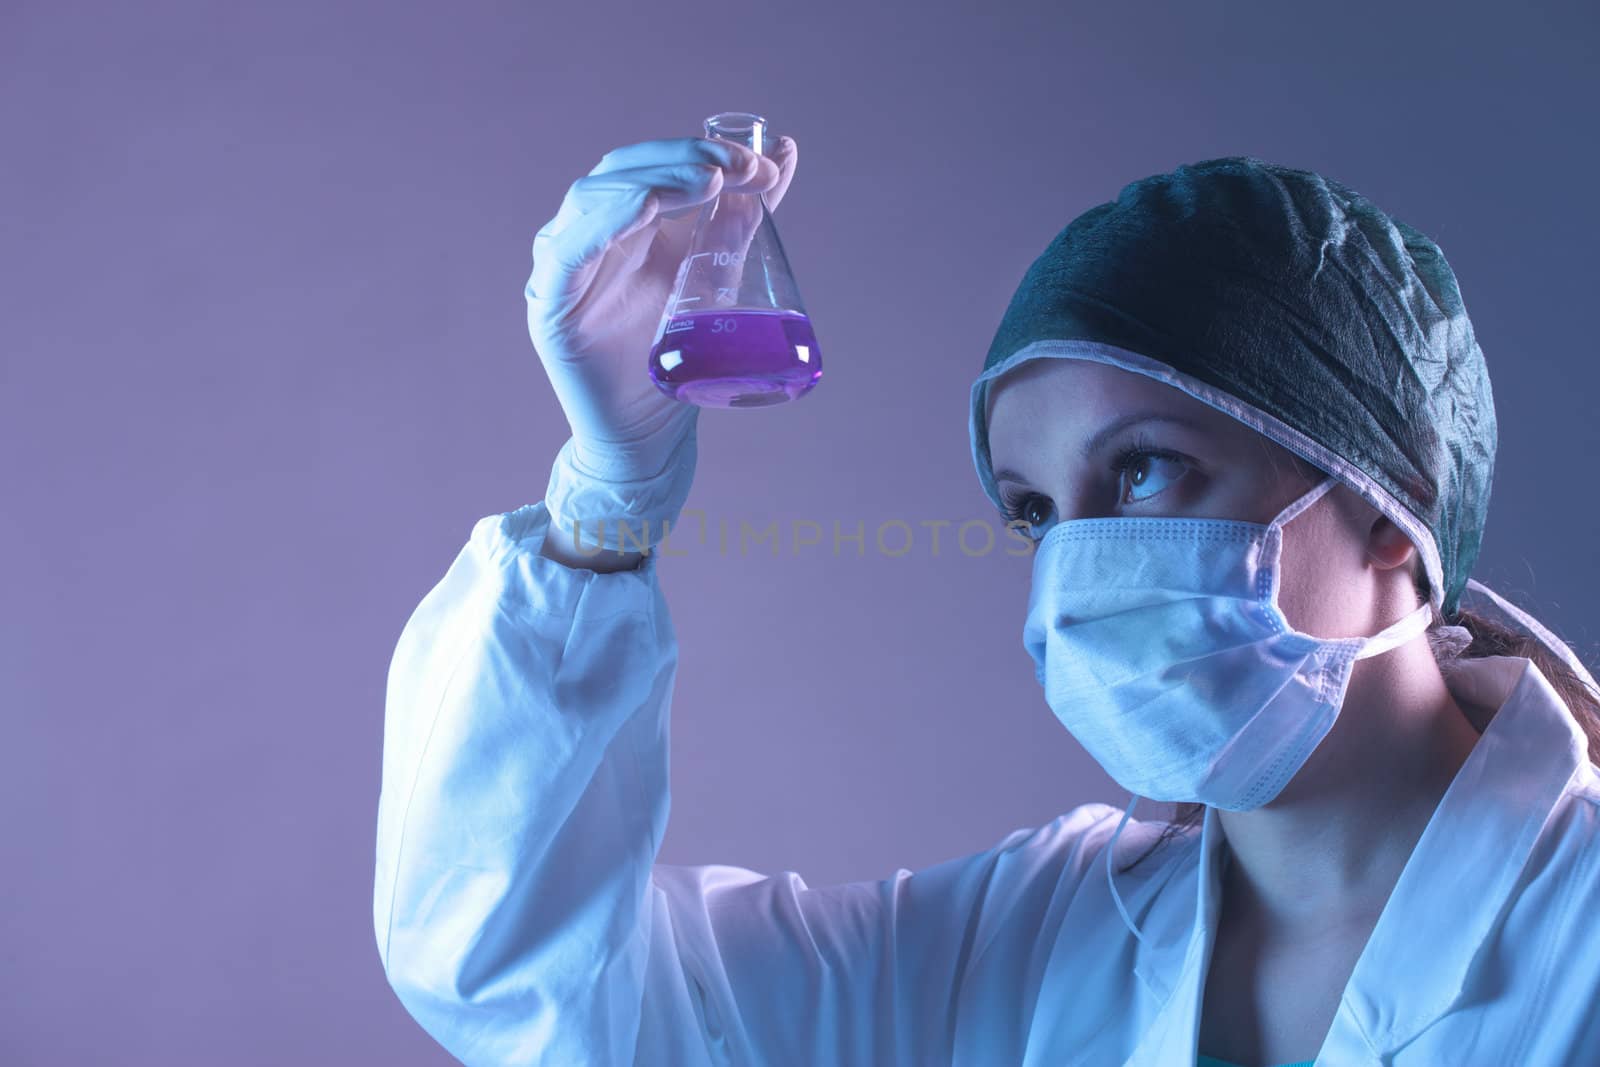 medical image: woman researcher working with chemicals